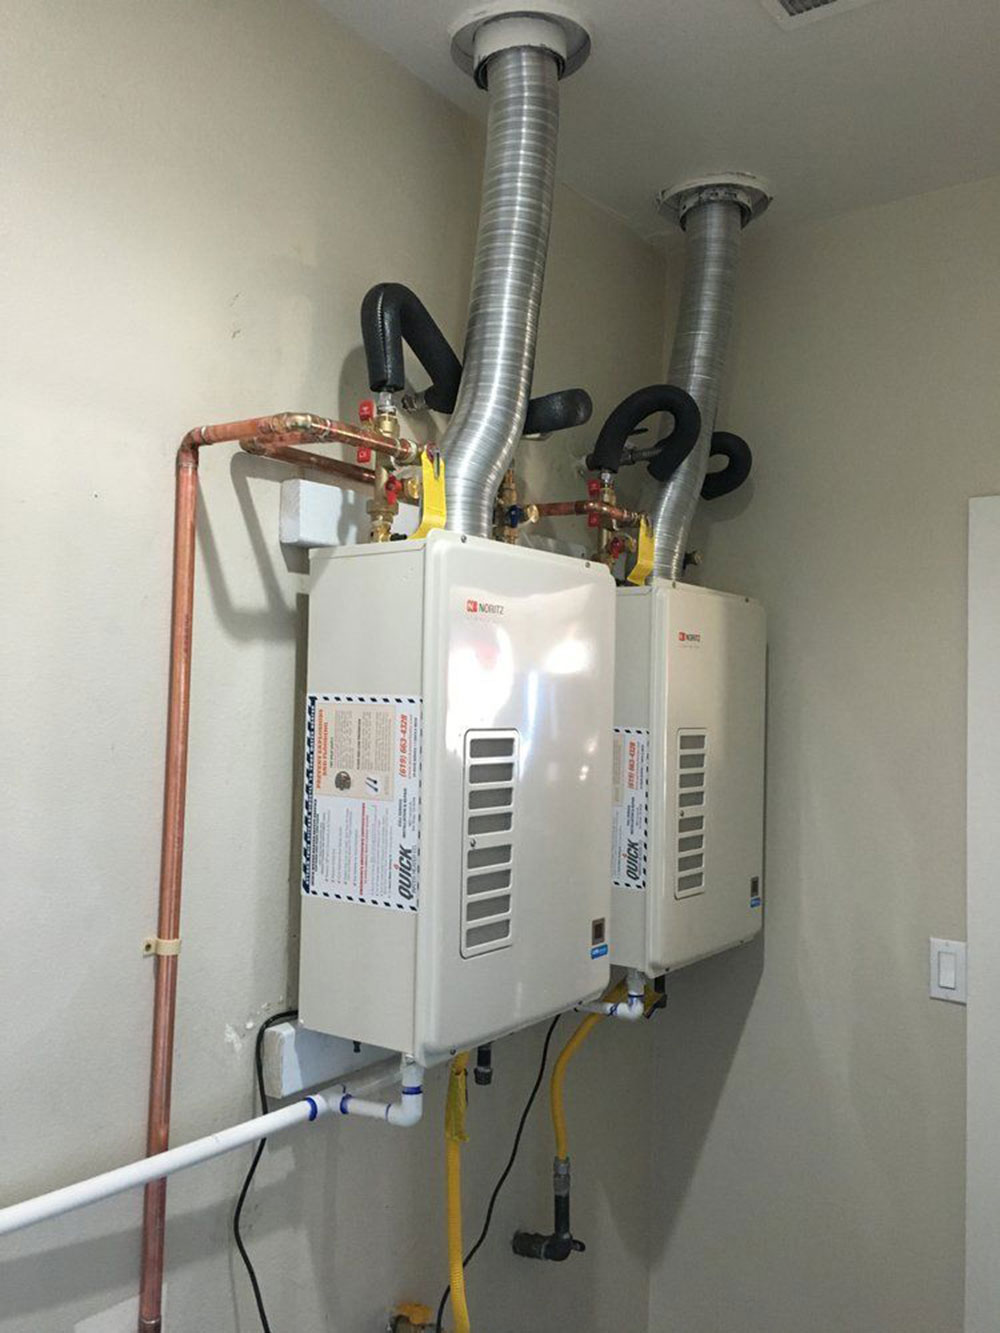 ventilation The tankless water heater pros and cons to know before buying